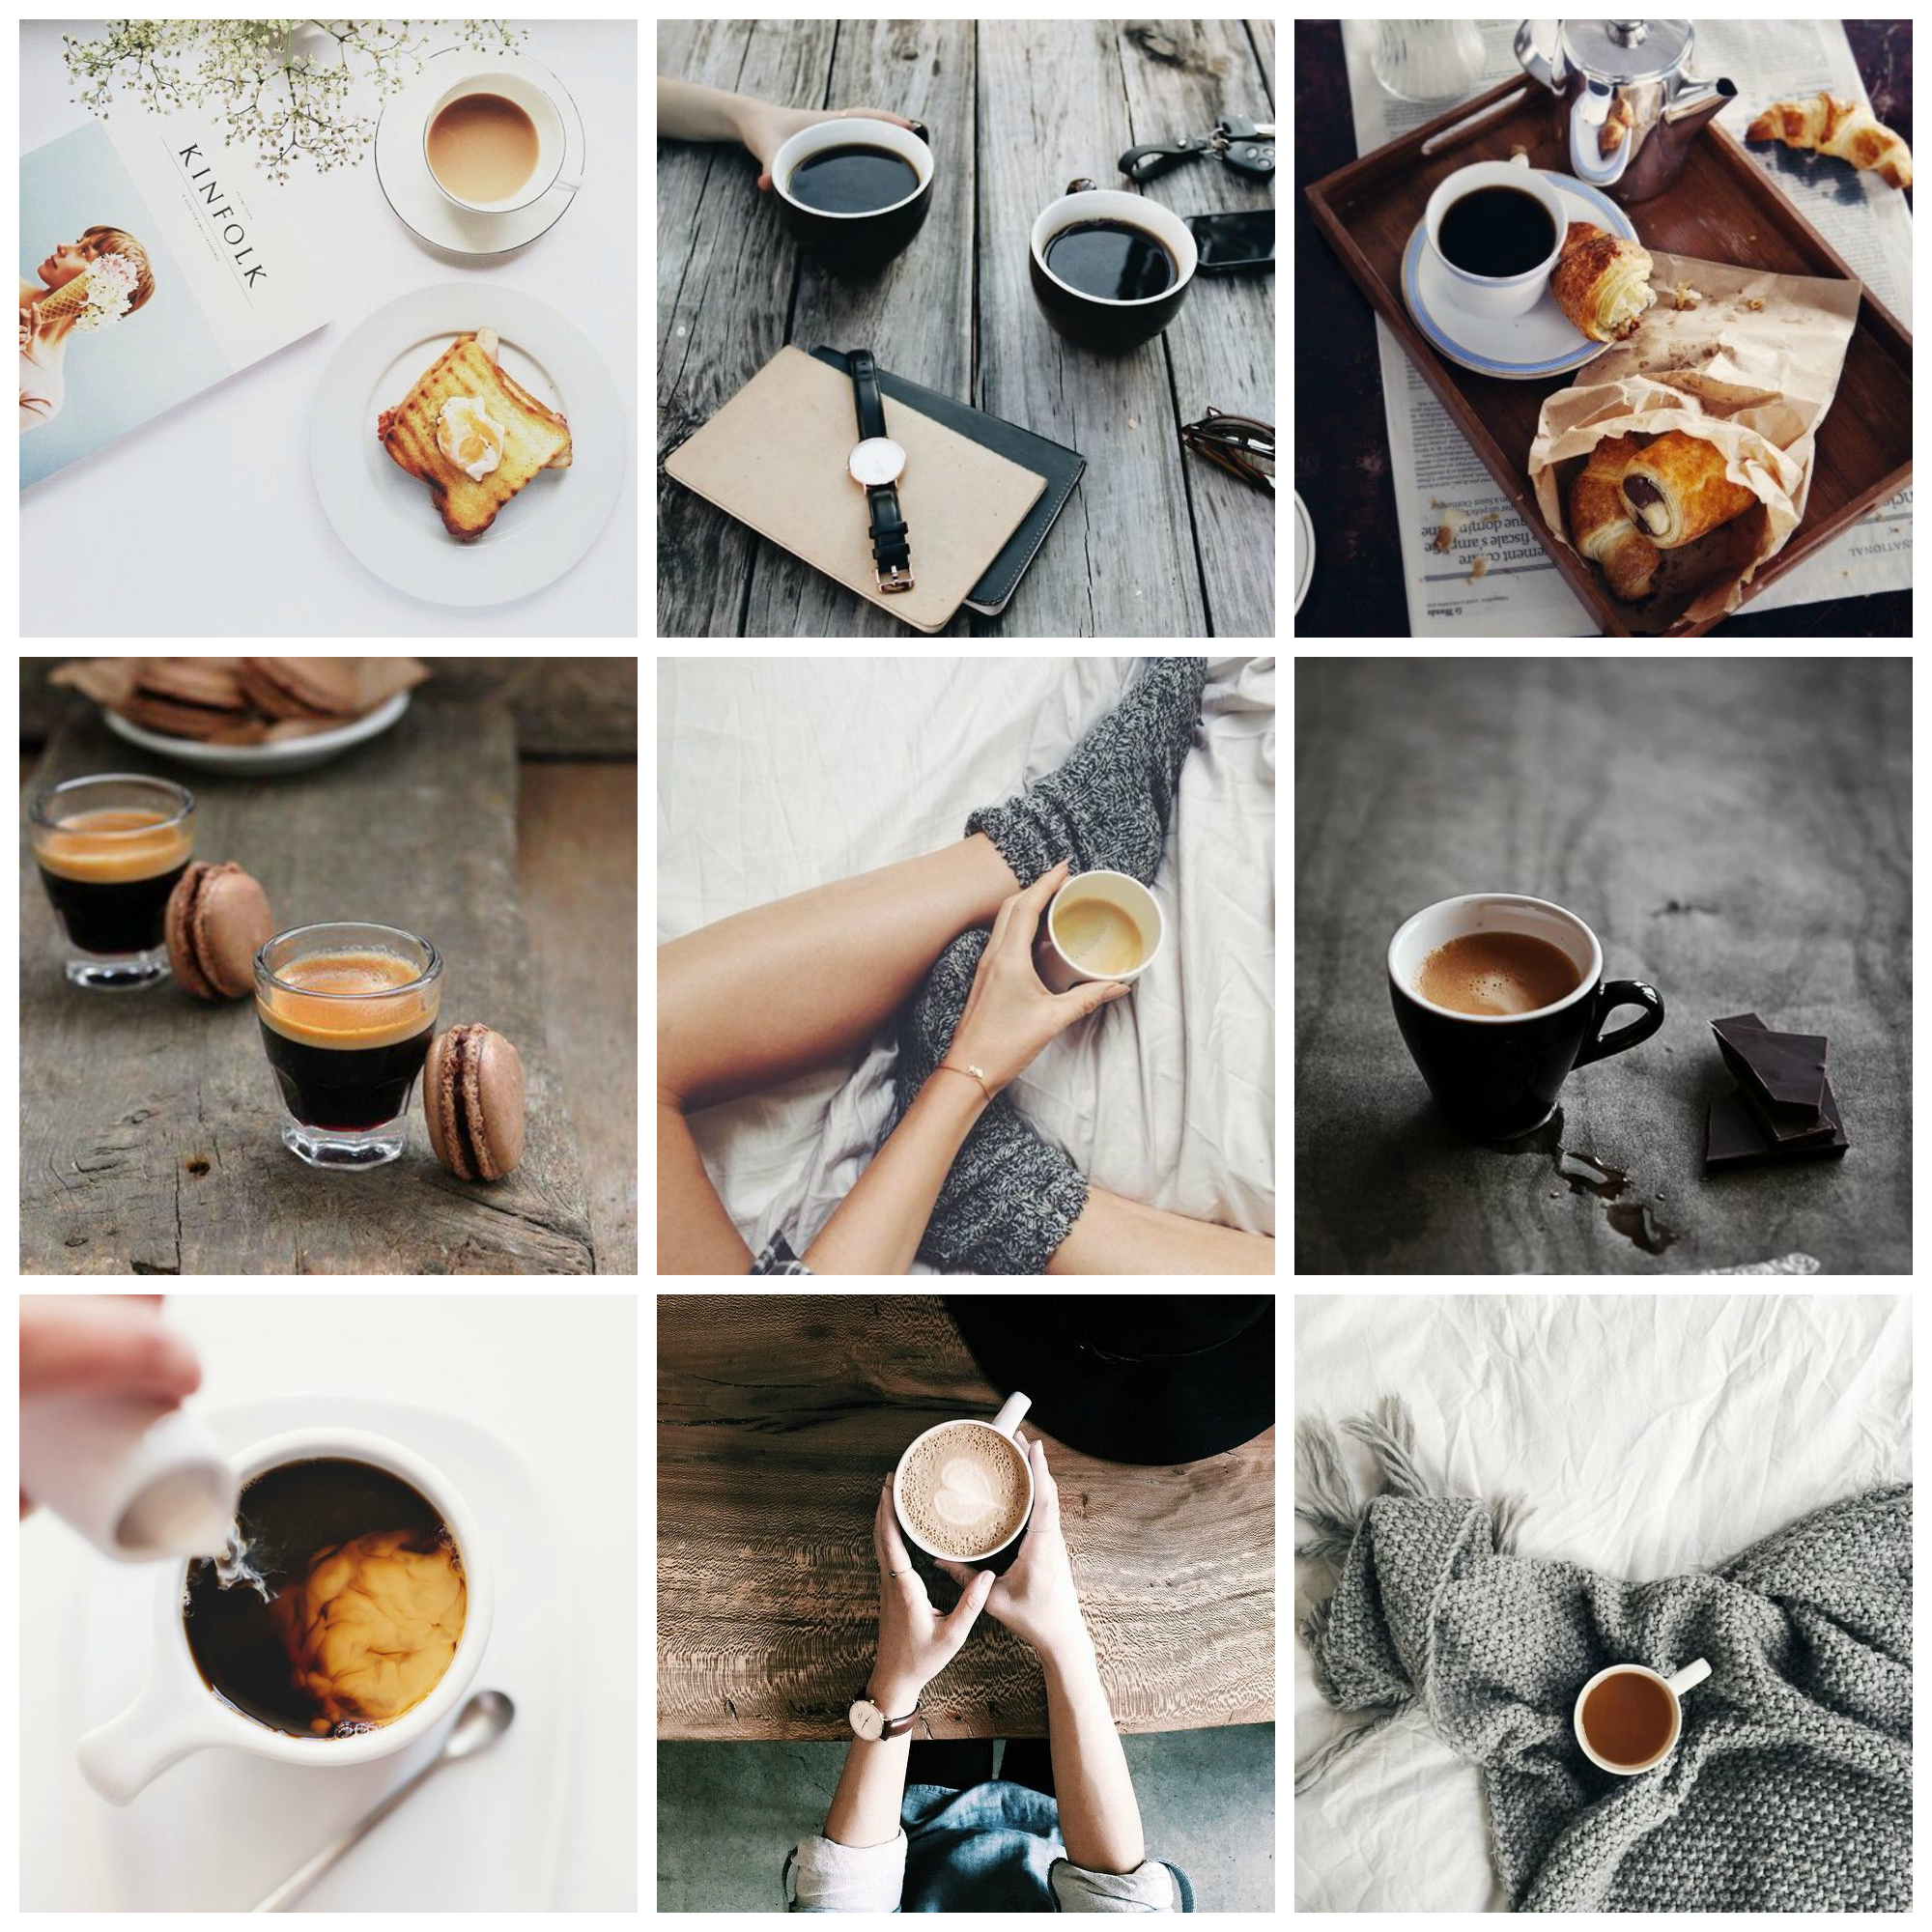 Coffee moments